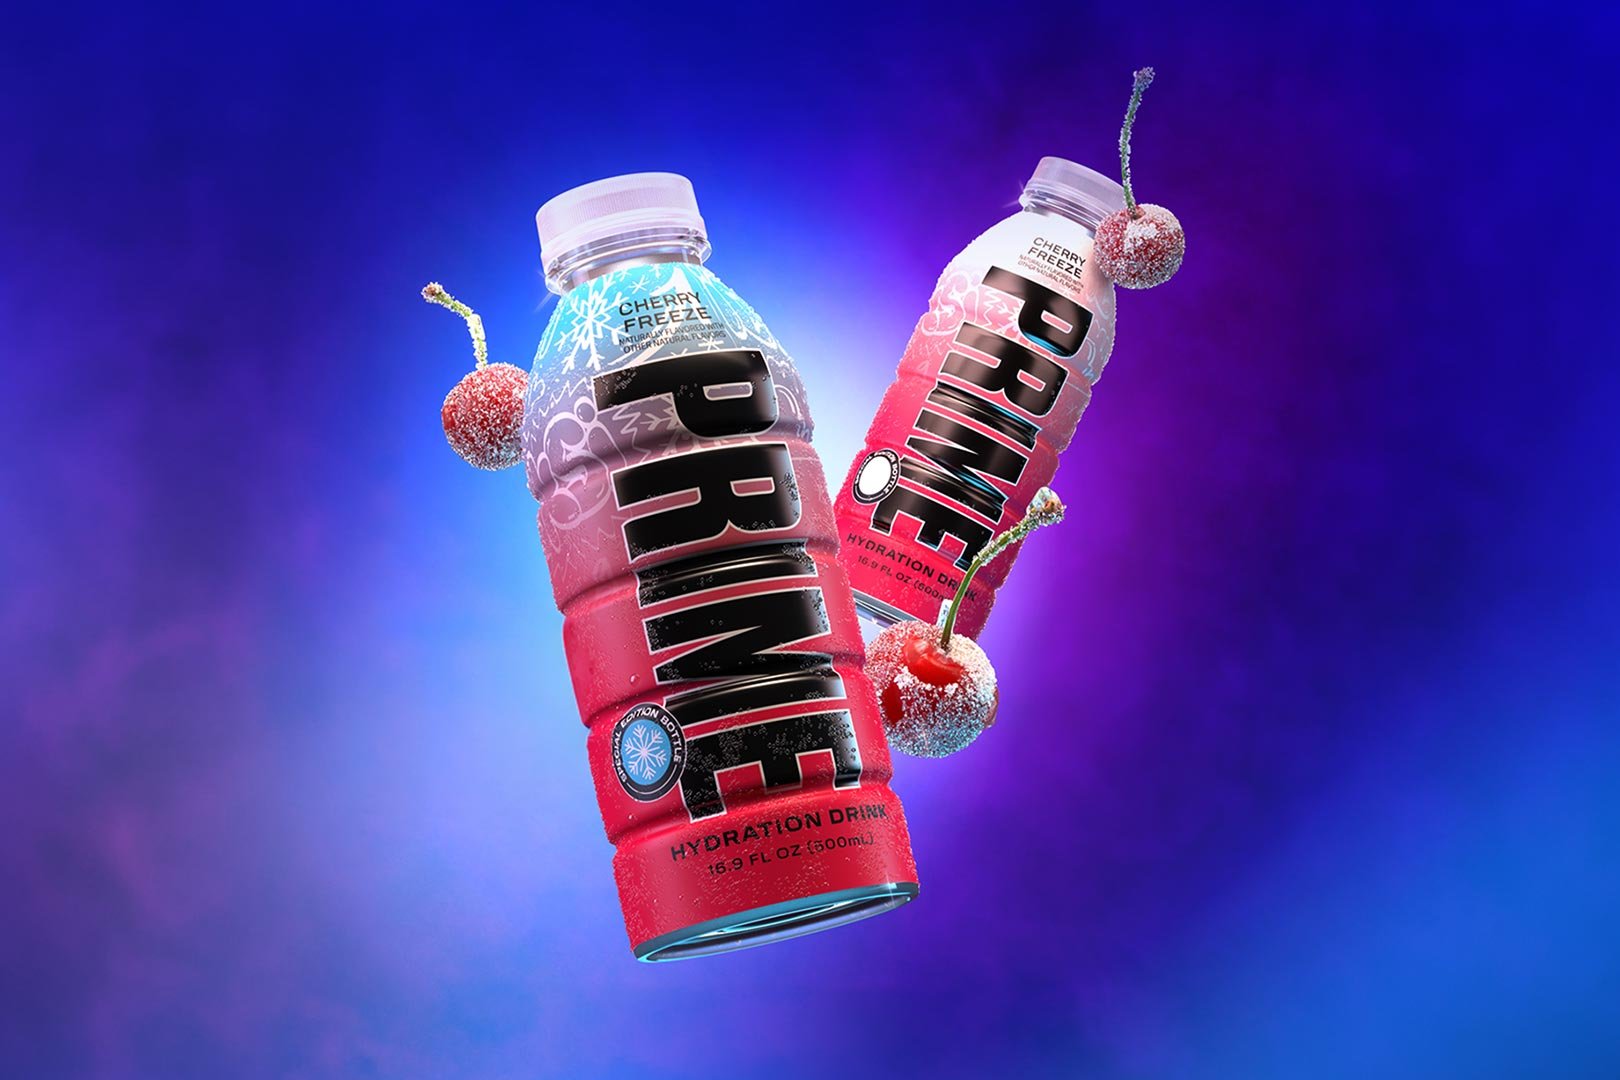 Walmart's special edition Cherry Freeze Prime Hydration Drink